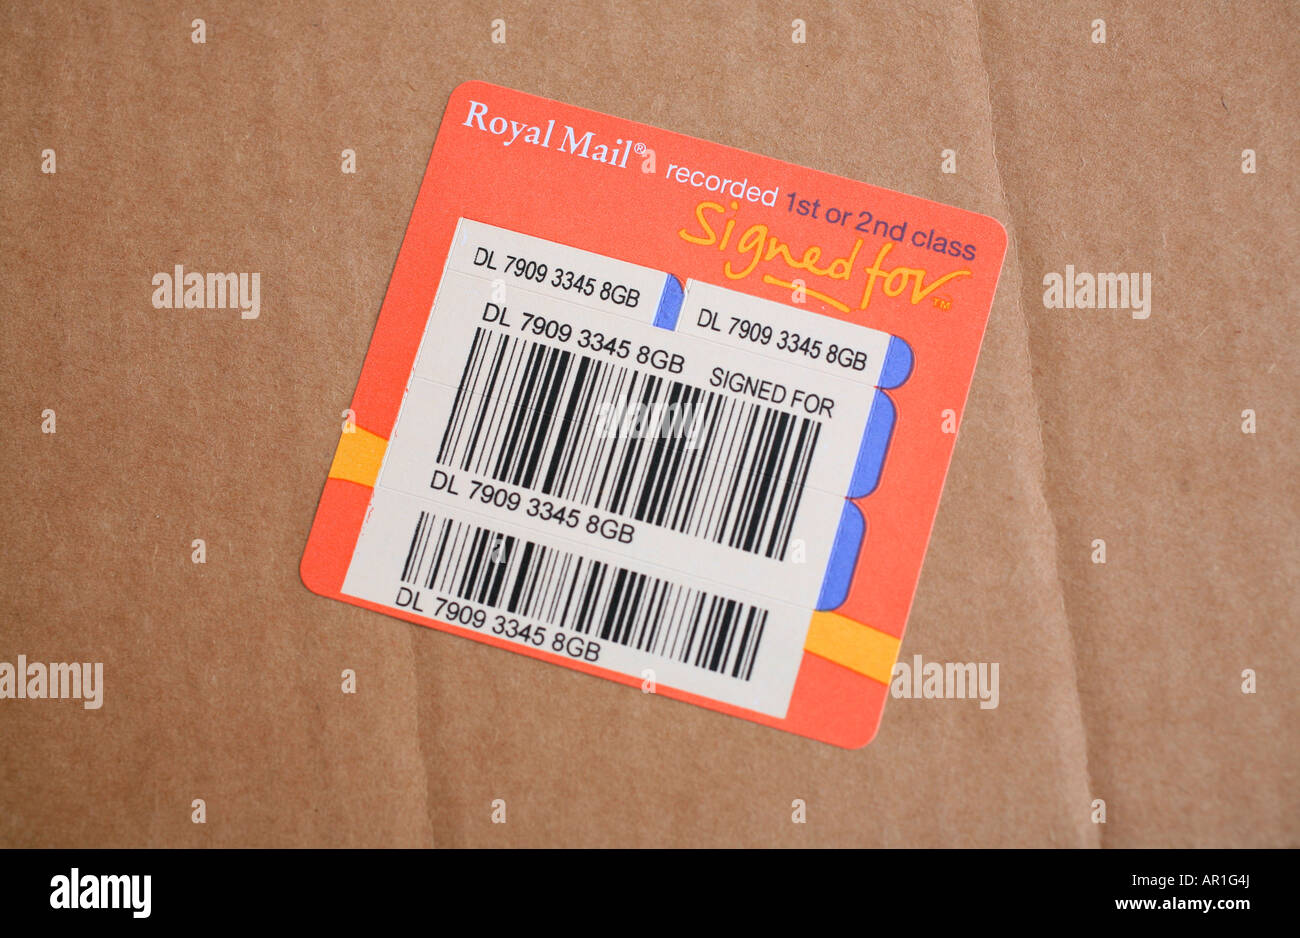 Royal Mail Recorded Signed For Parcel Label Stock Photo Alamy